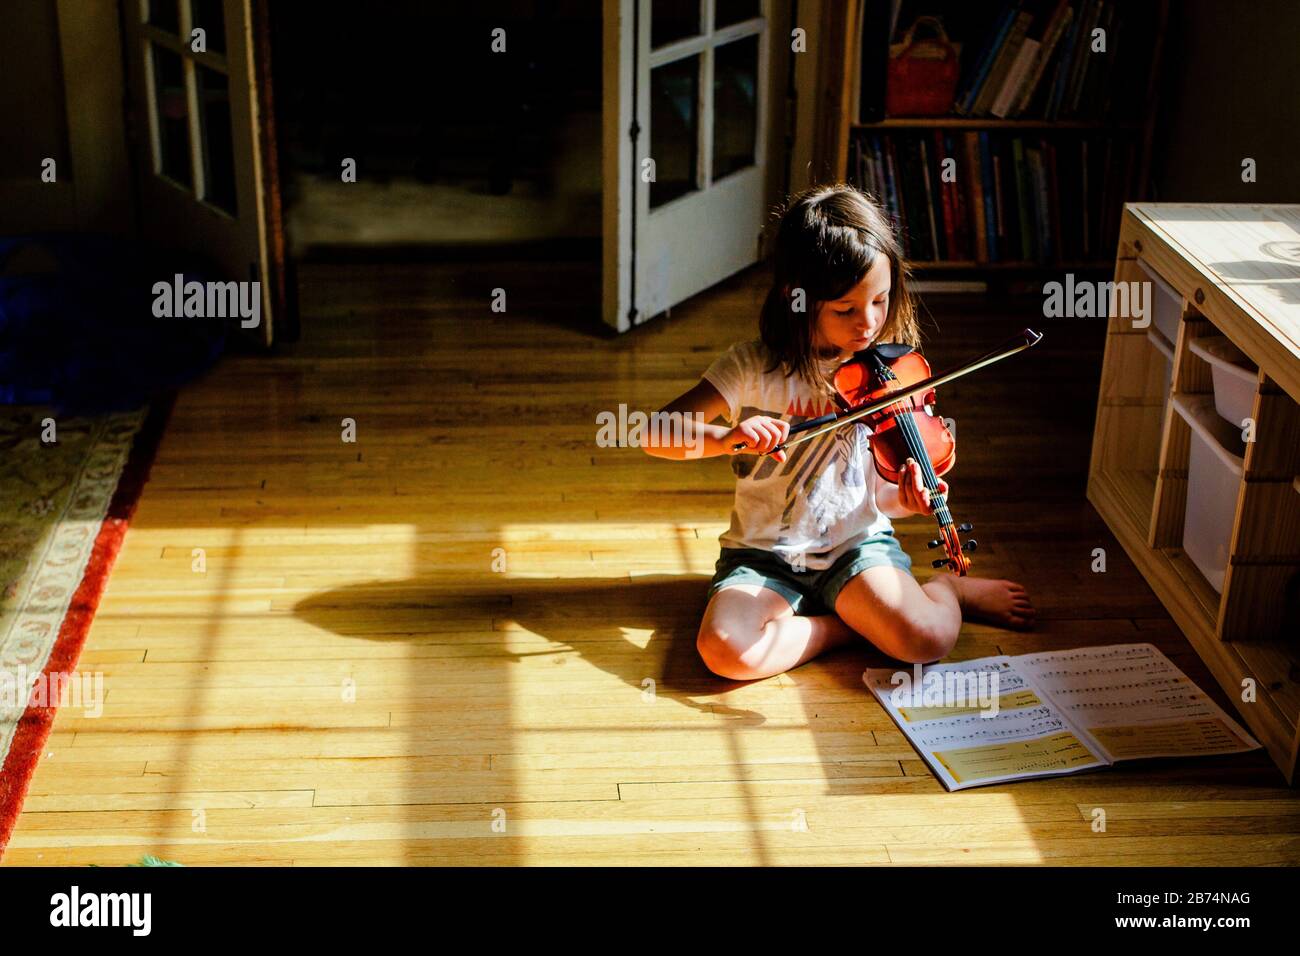 A small child sits alone in a patch of sunlit playing violin Stock Photo